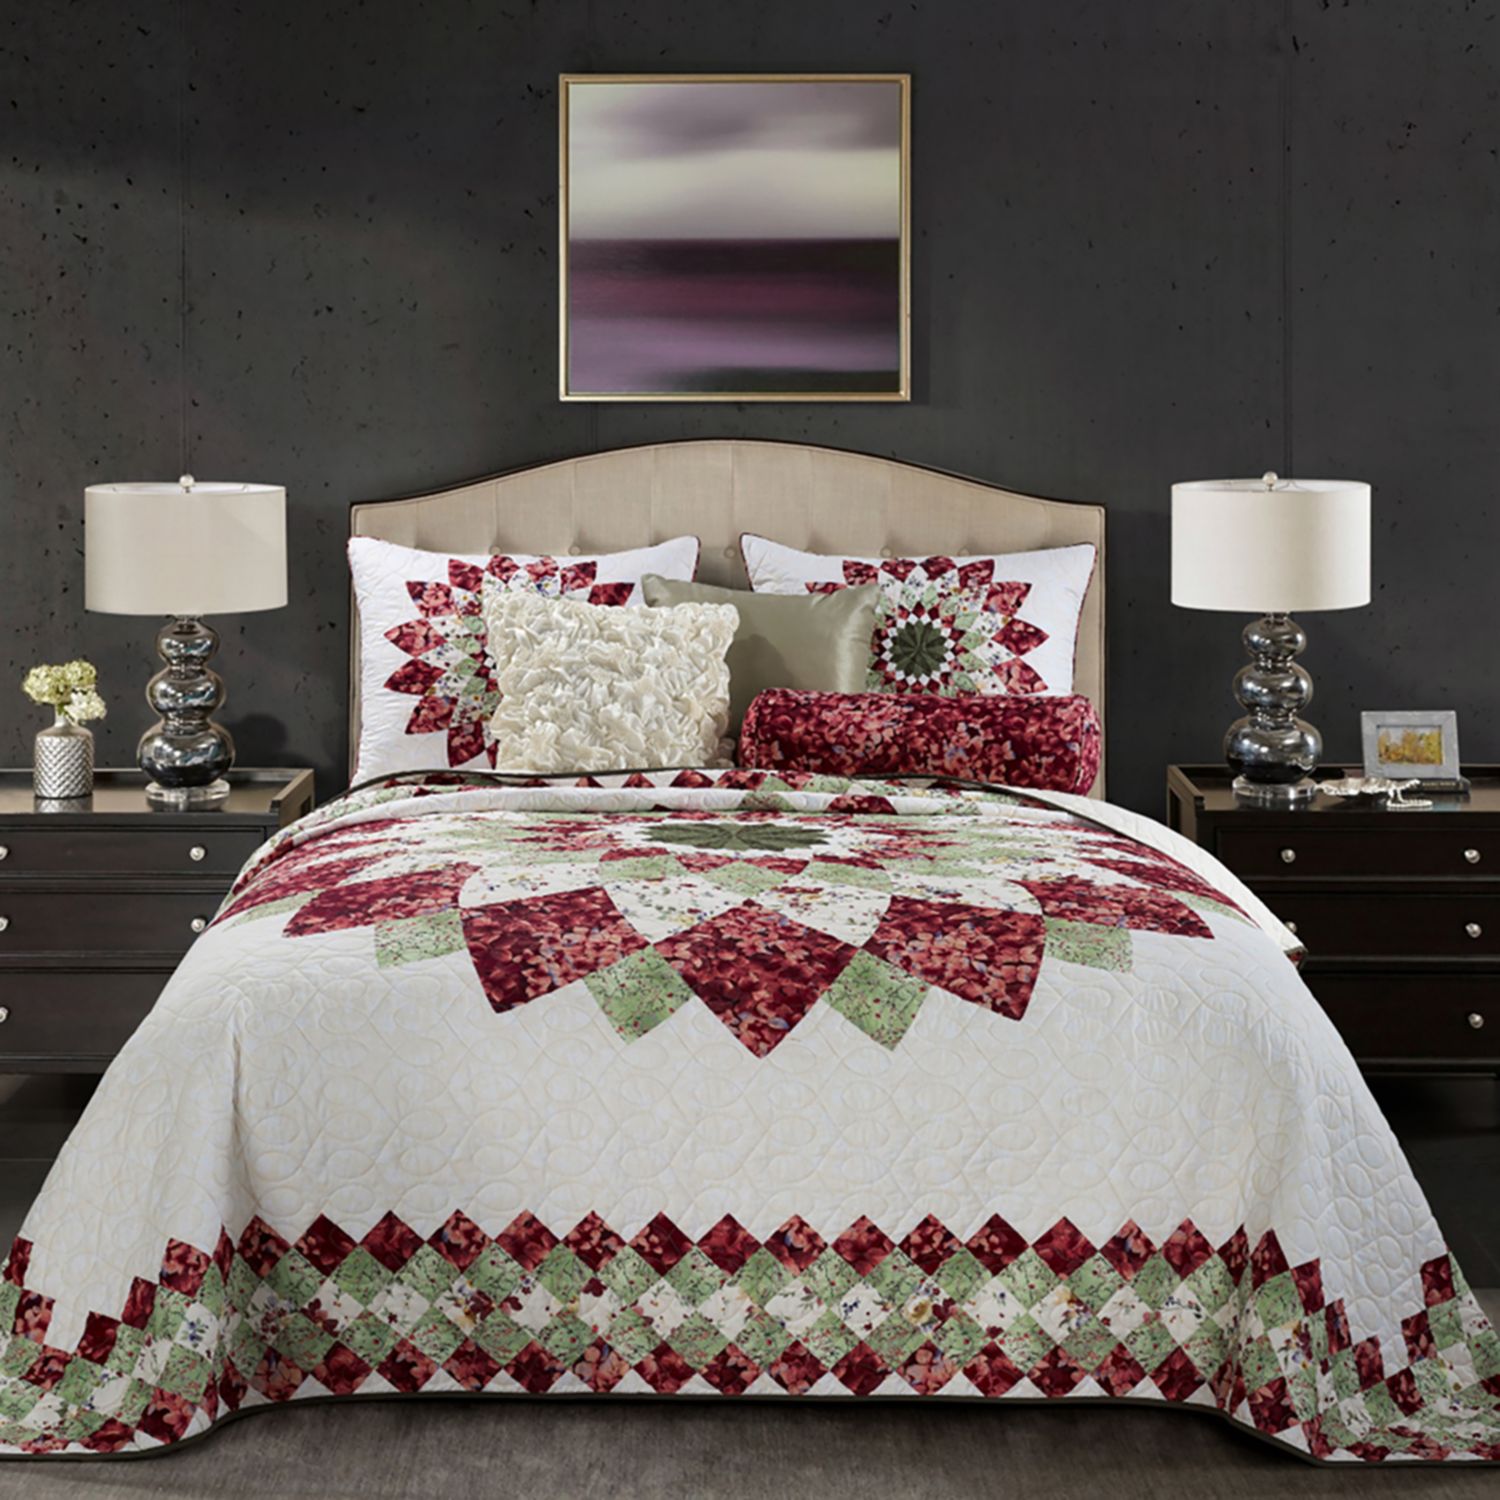 Image for Donna Sharp Springfield Dahlia Quilt or Sham at Kohl's.